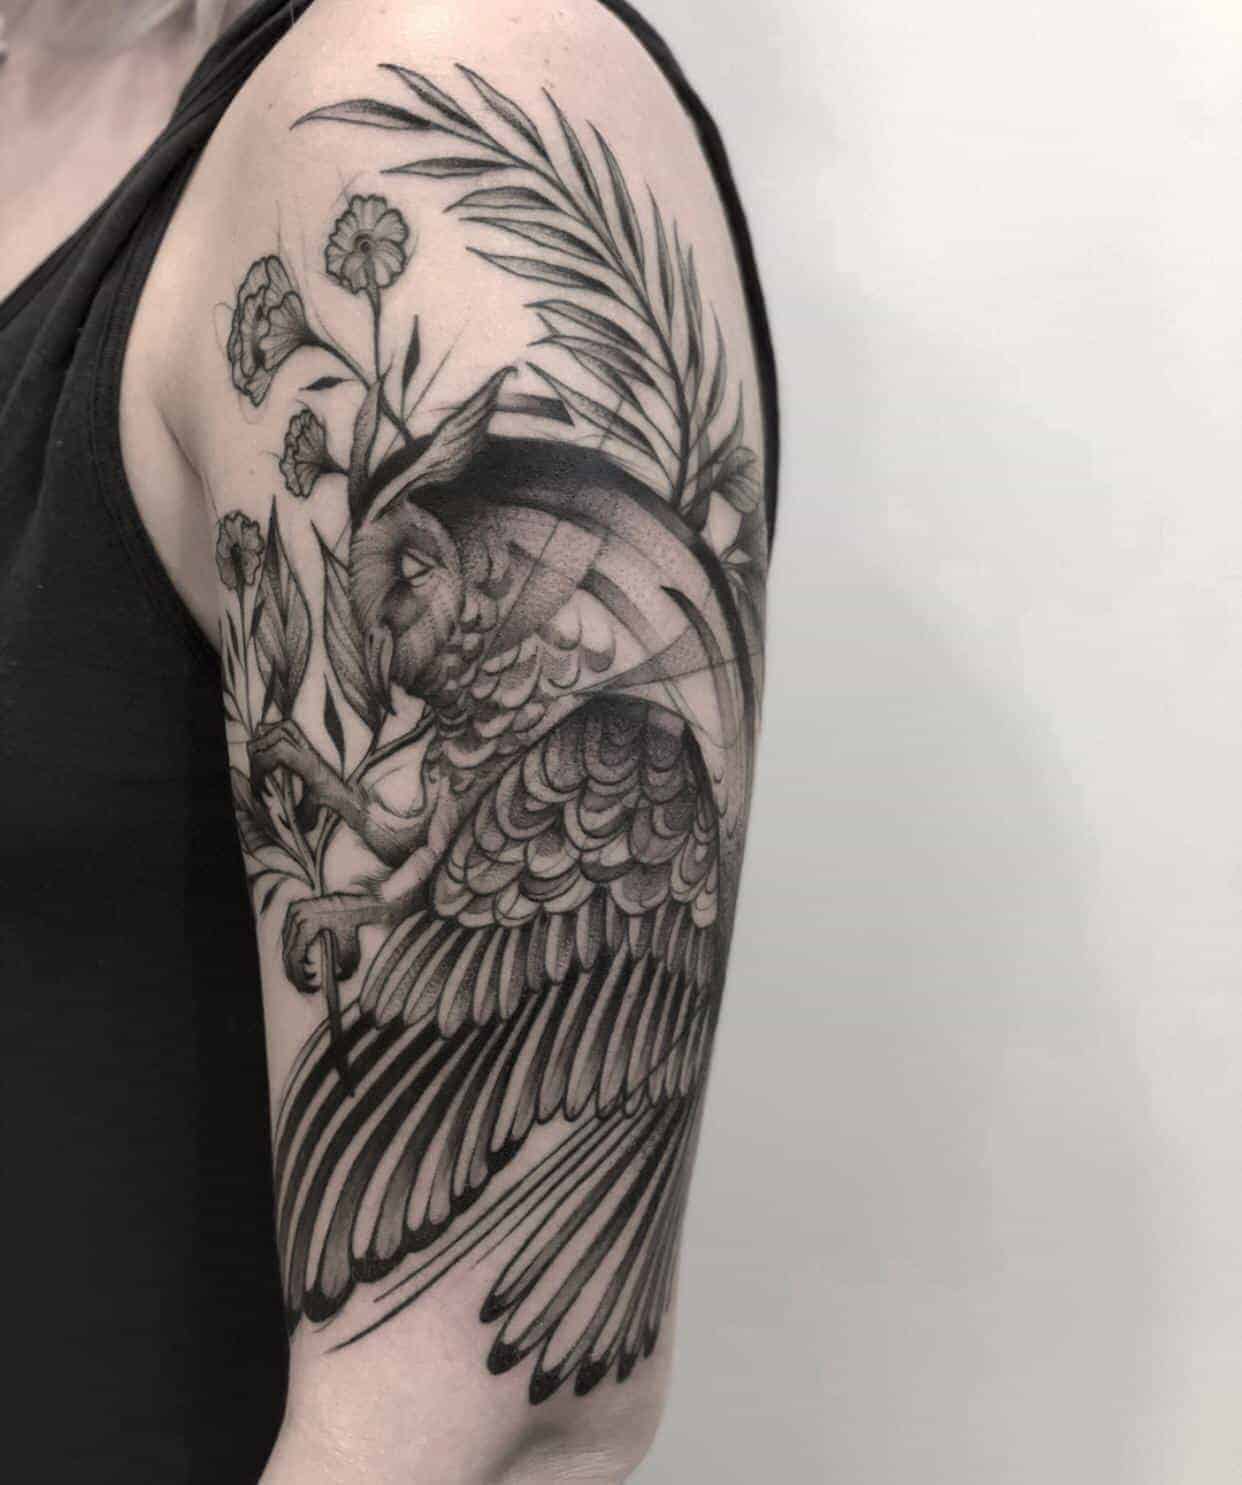 Owl feather... by Lisa ✌️... - Desire Tattoo Studio | Facebook